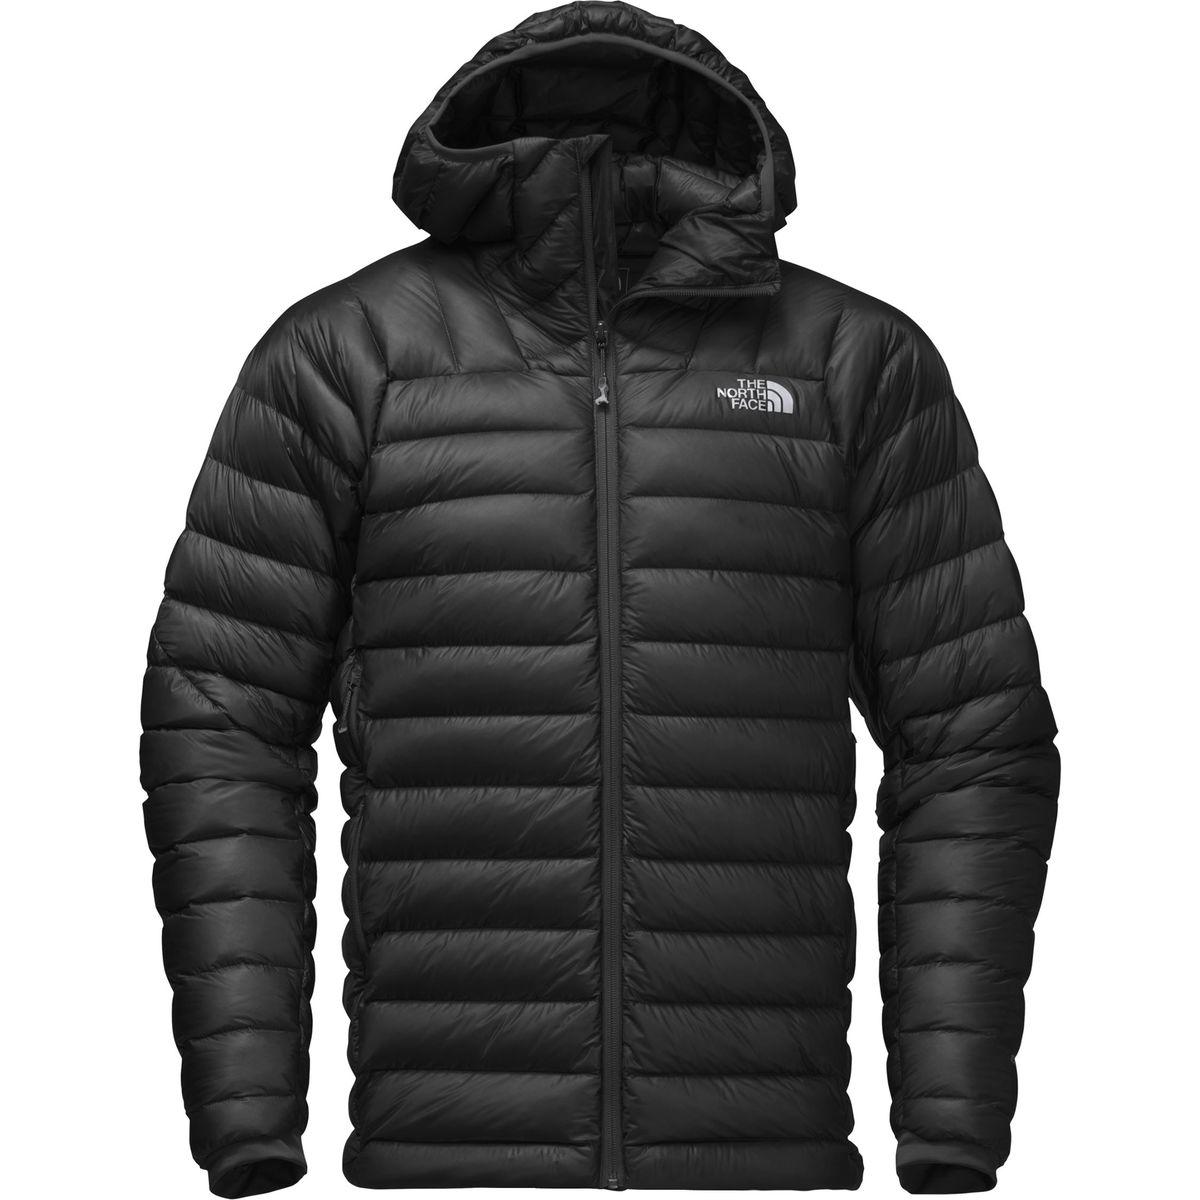 The North Face Goose Summit L3 Hooded Down Jacket in Black for Men - Lyst